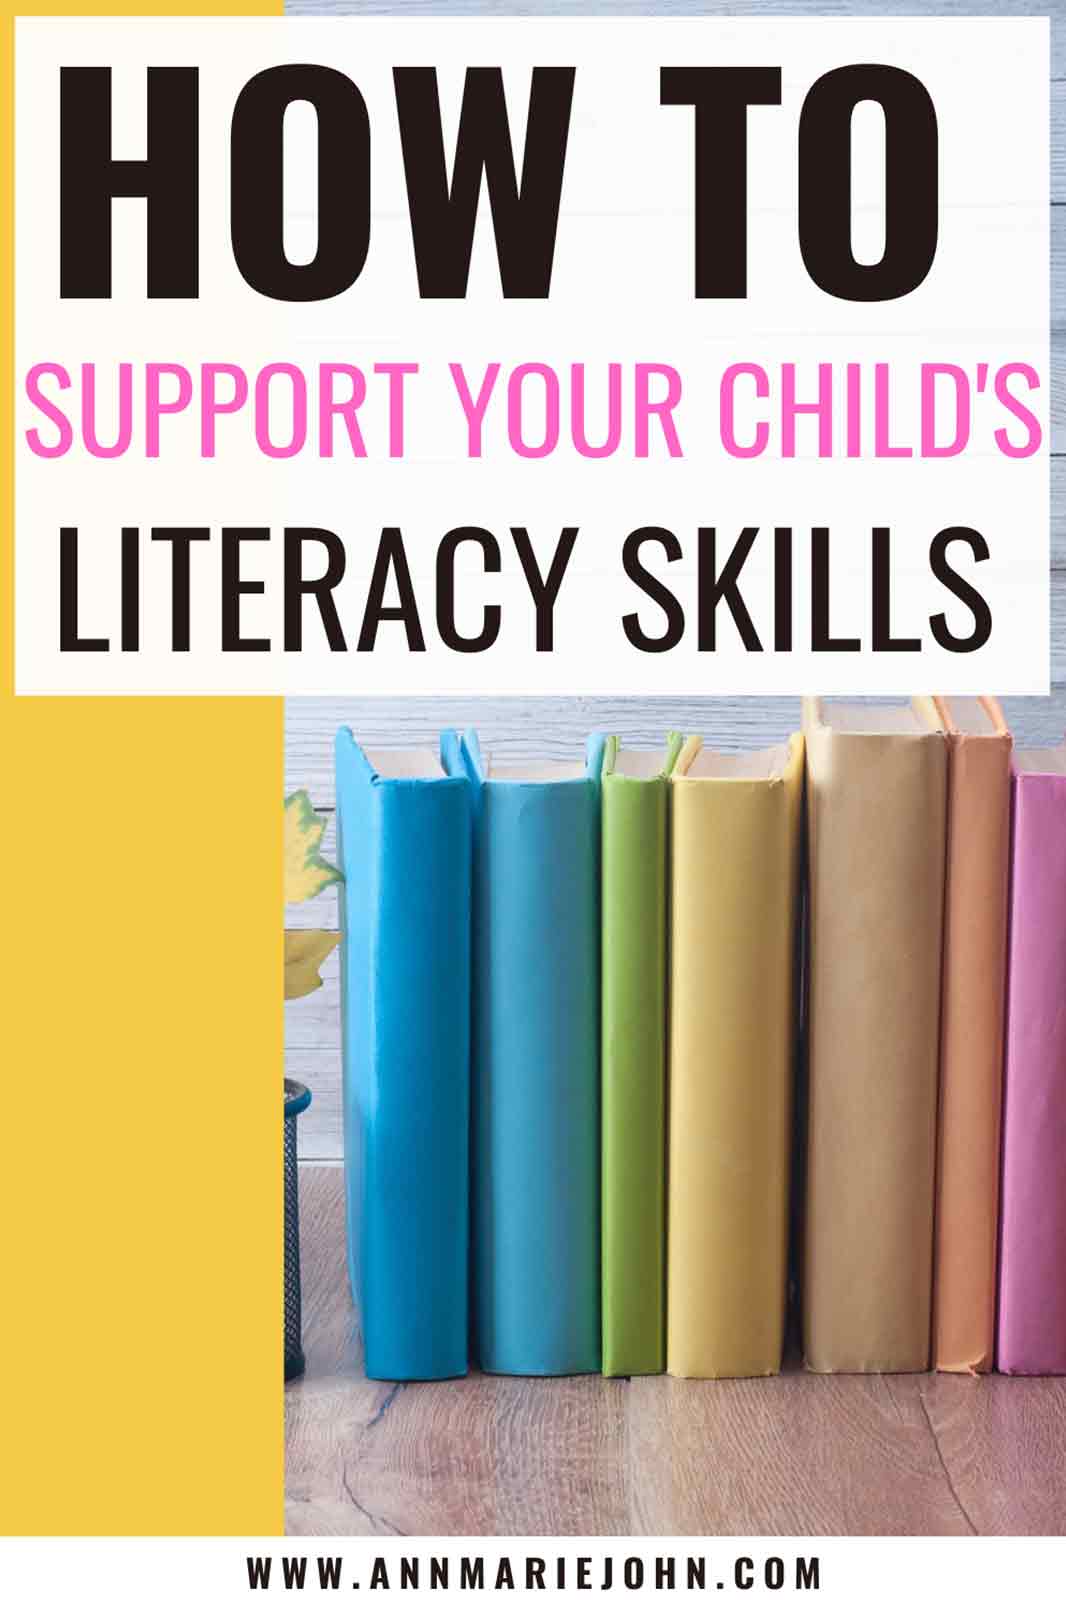 How to Support Your Childs Literacy Skills